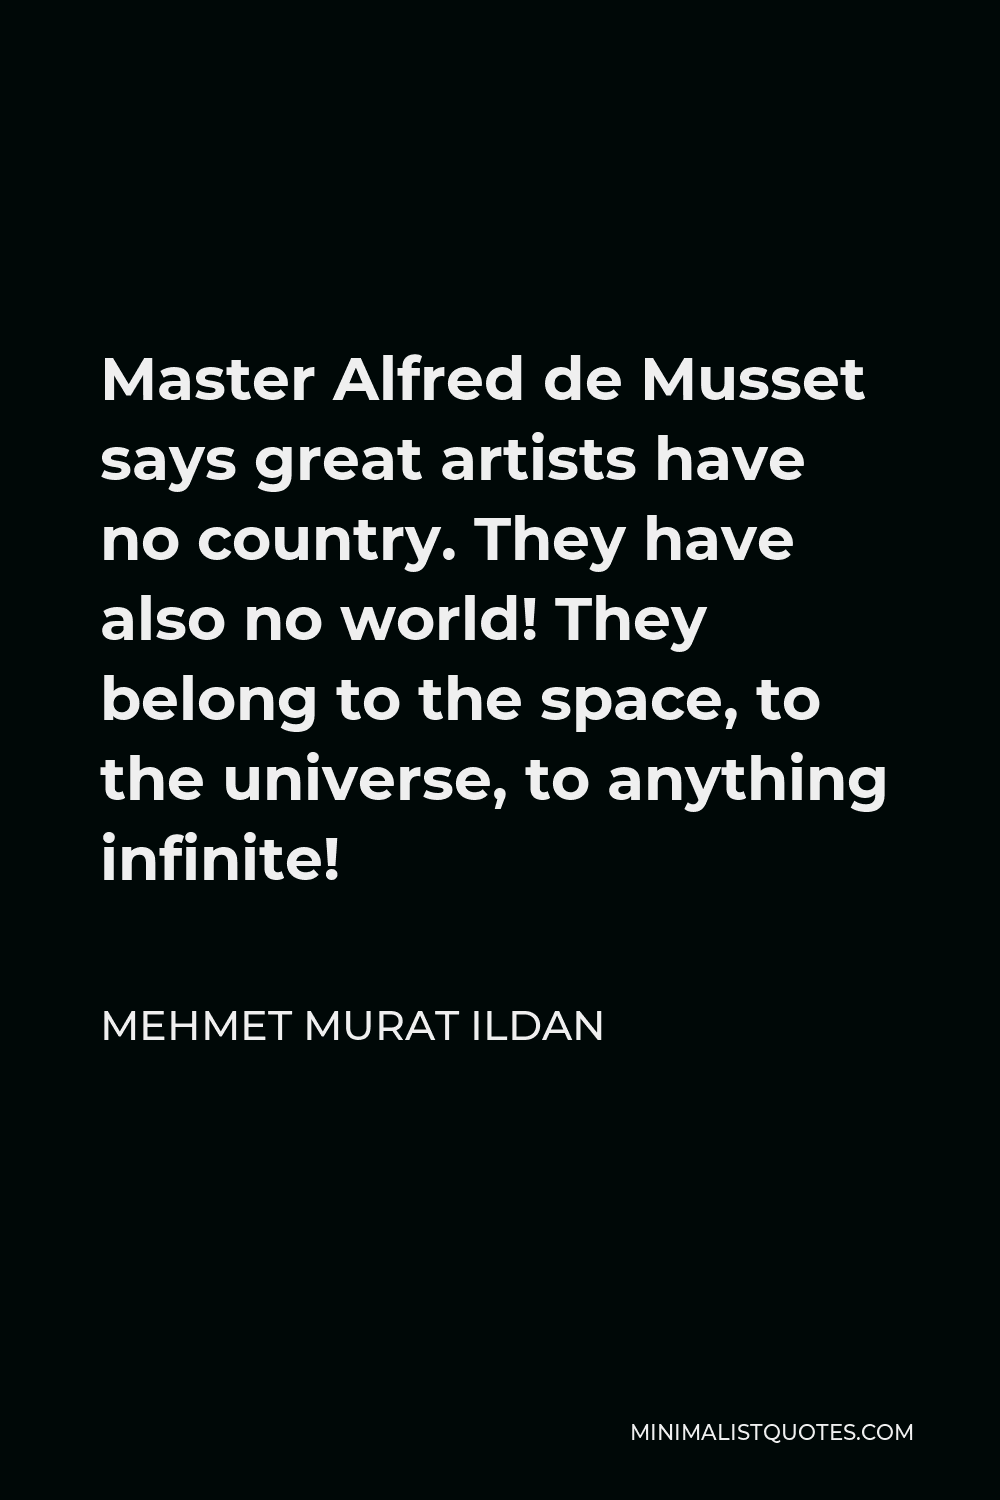 Mehmet Murat Ildan Quote - Master Alfred de Musset says great artists have no country. They have also no world! They belong to the space, to the universe, to anything infinite!